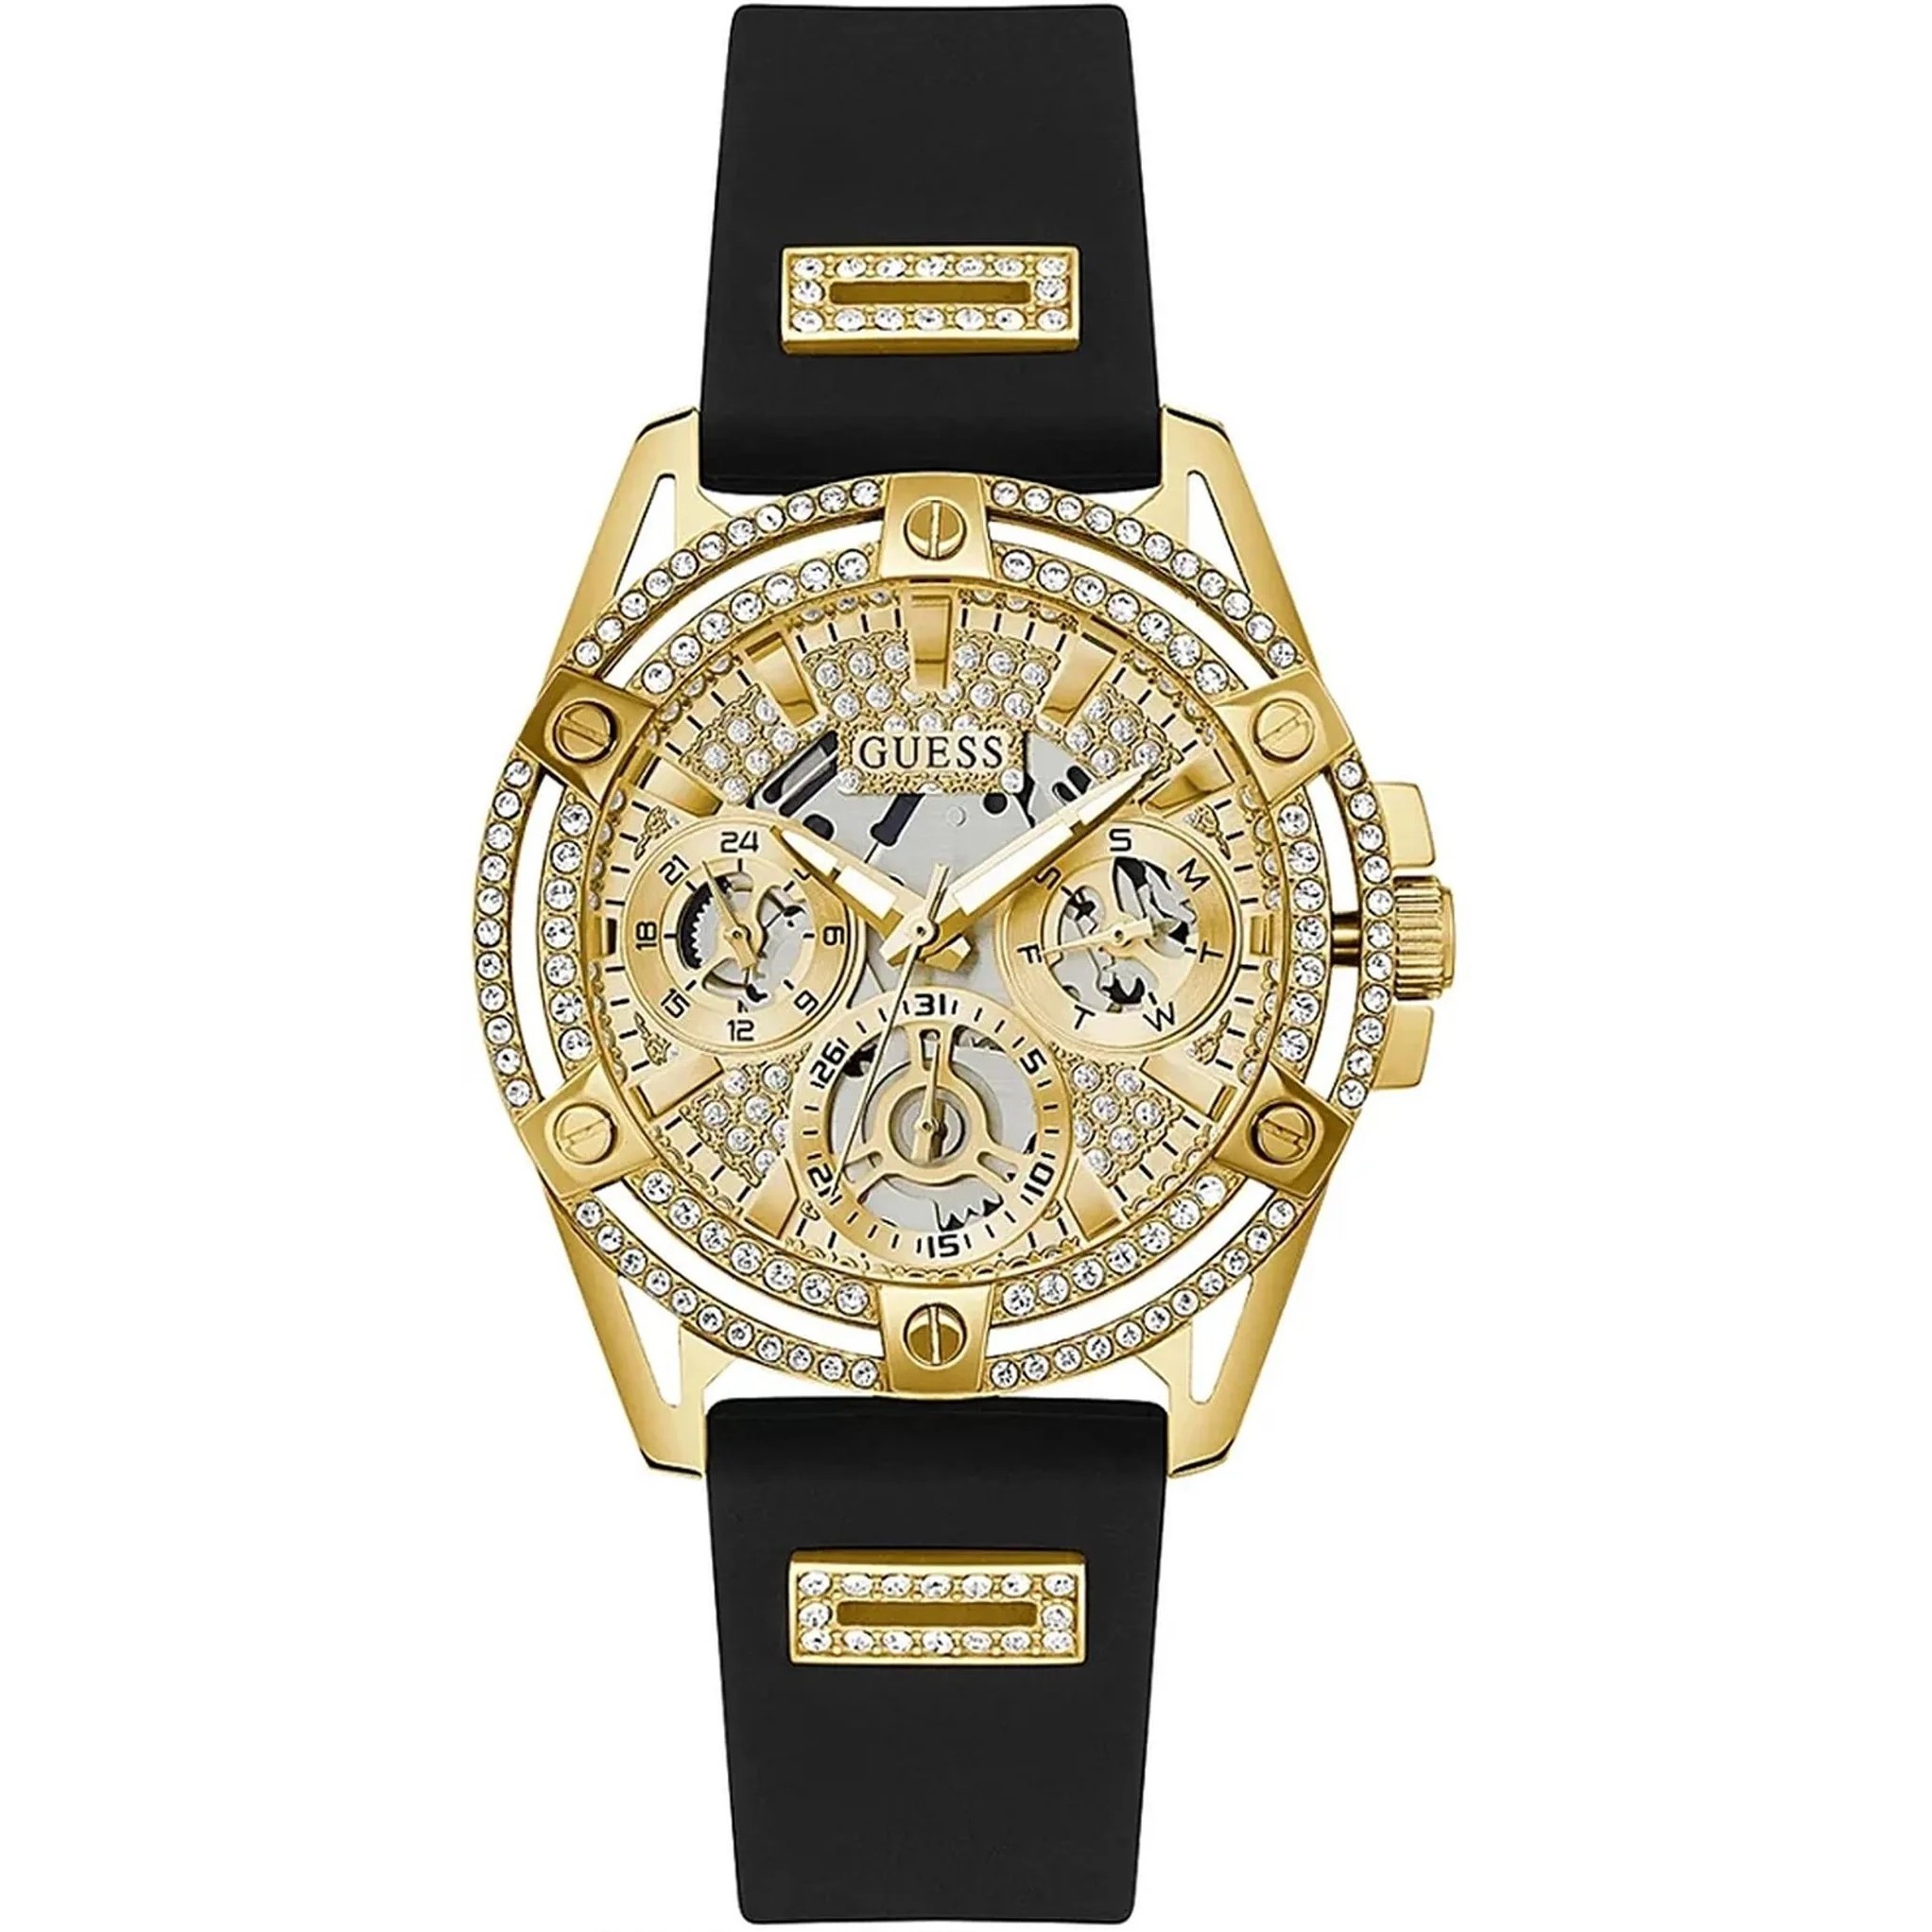 ĐỒNG HỒ GUESS GOLD-TONE MULTI-FUNCTION BLACK SILICONE WATCH GW0536L3 4